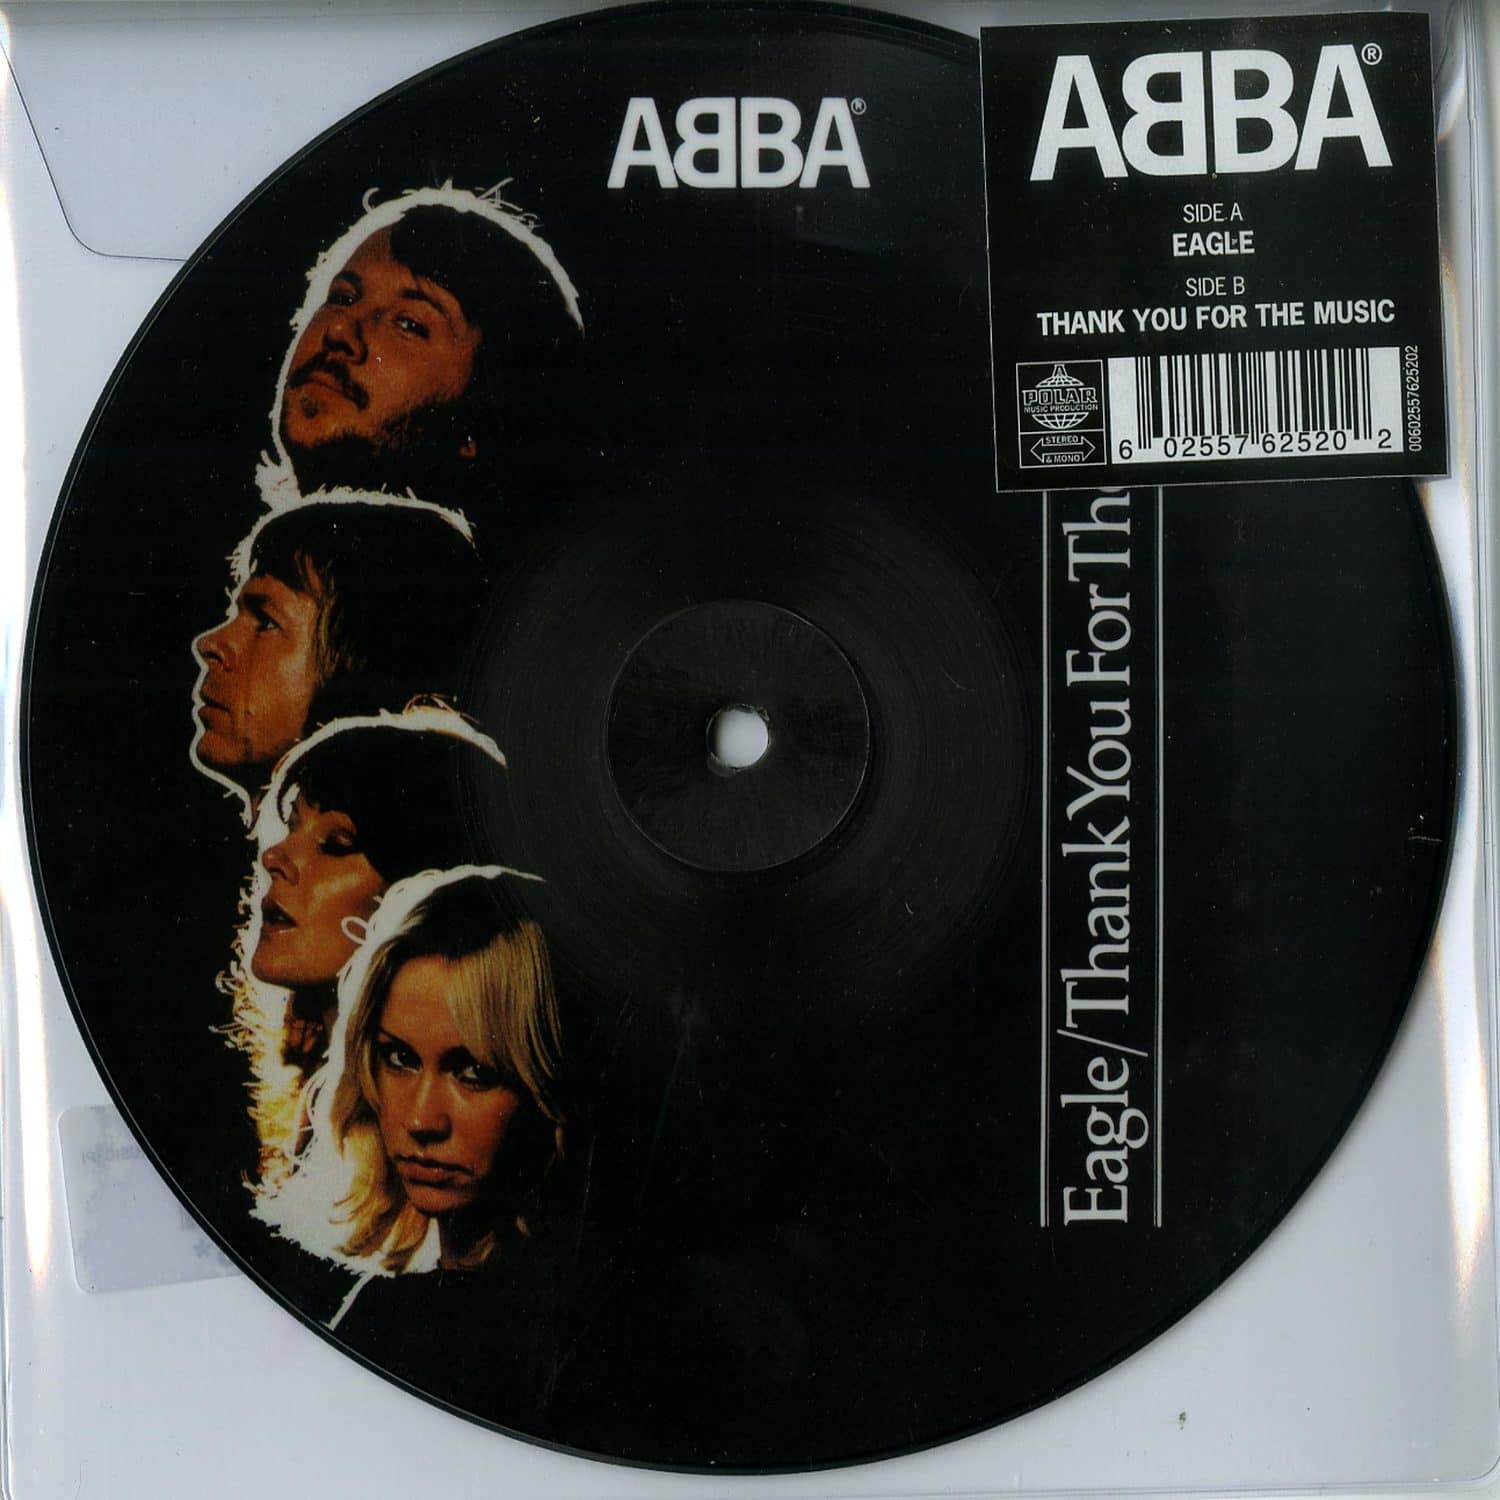 ABBA - EAGLE / THANK YOU FOR THE MUSIC 